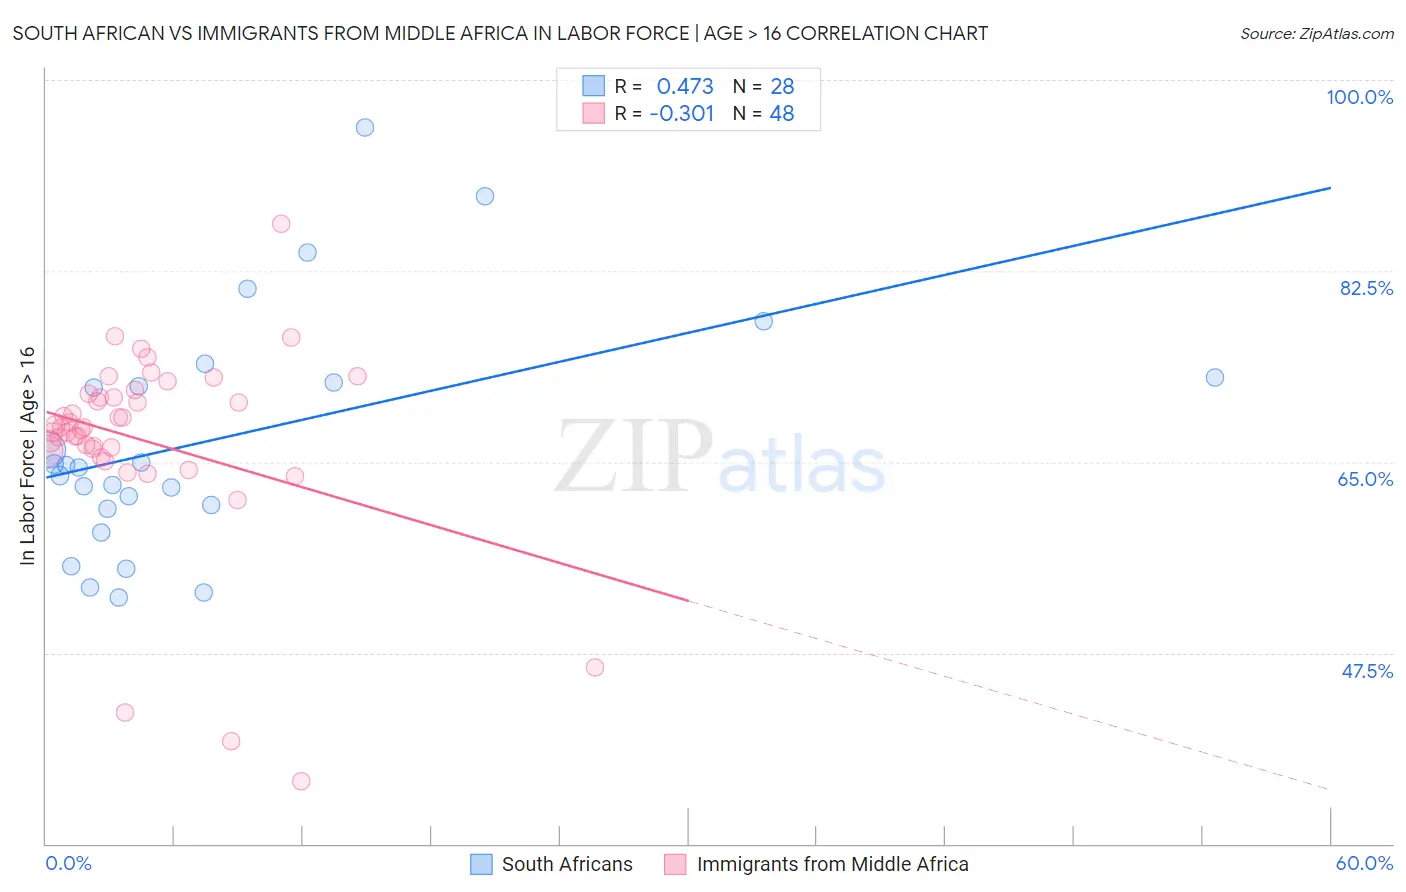 South African vs Immigrants from Middle Africa In Labor Force | Age > 16